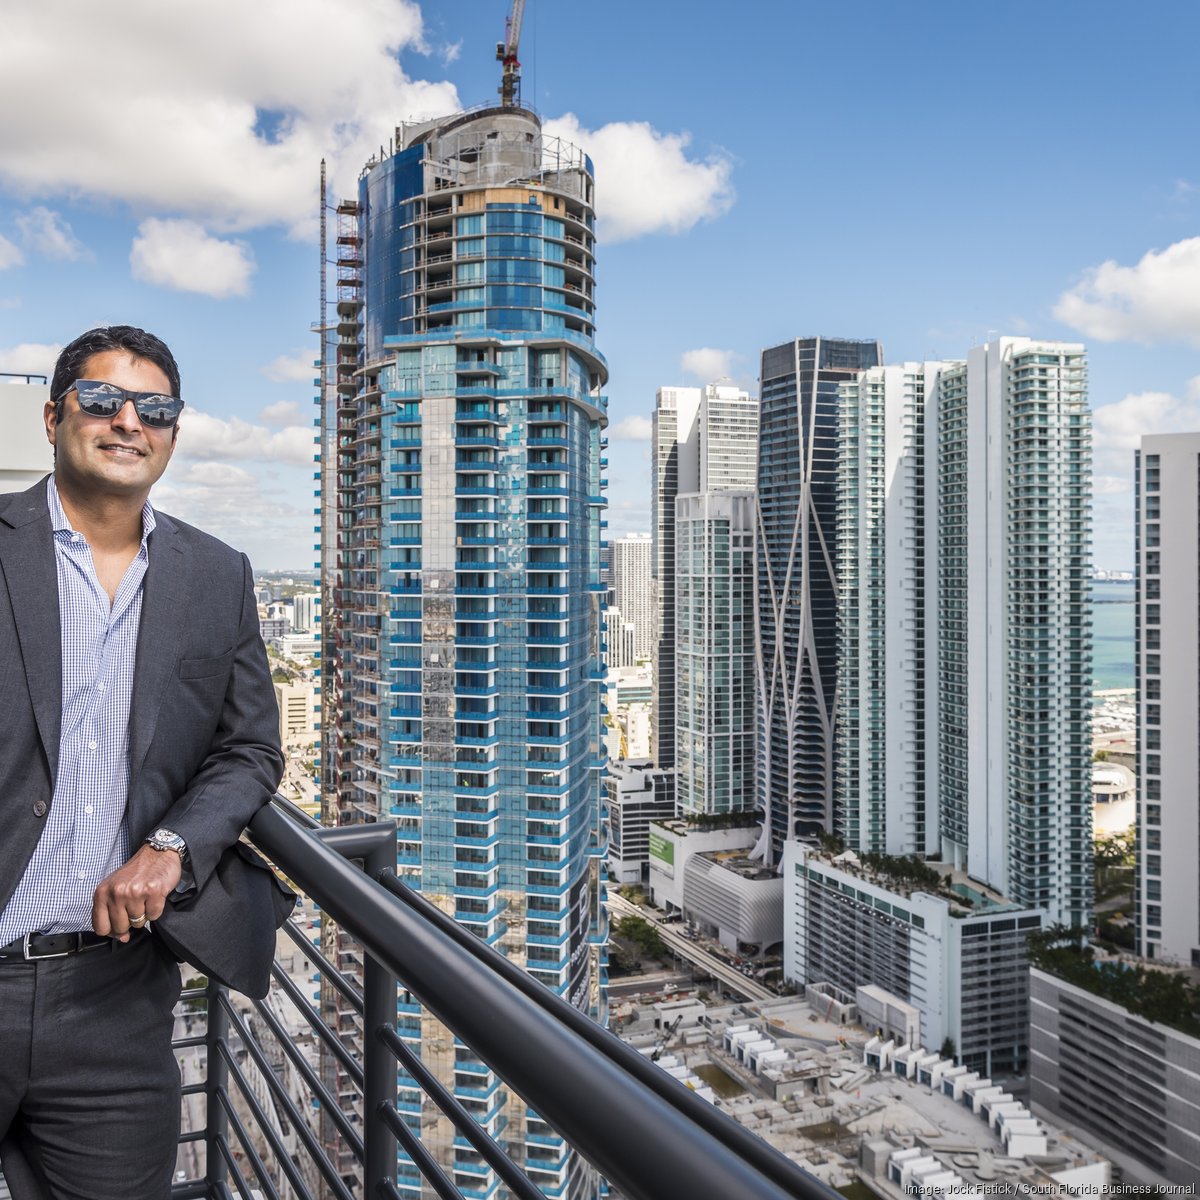 Miami Worldcenter's first building to open is Caoba apartments (Photos) -  South Florida Business Journal